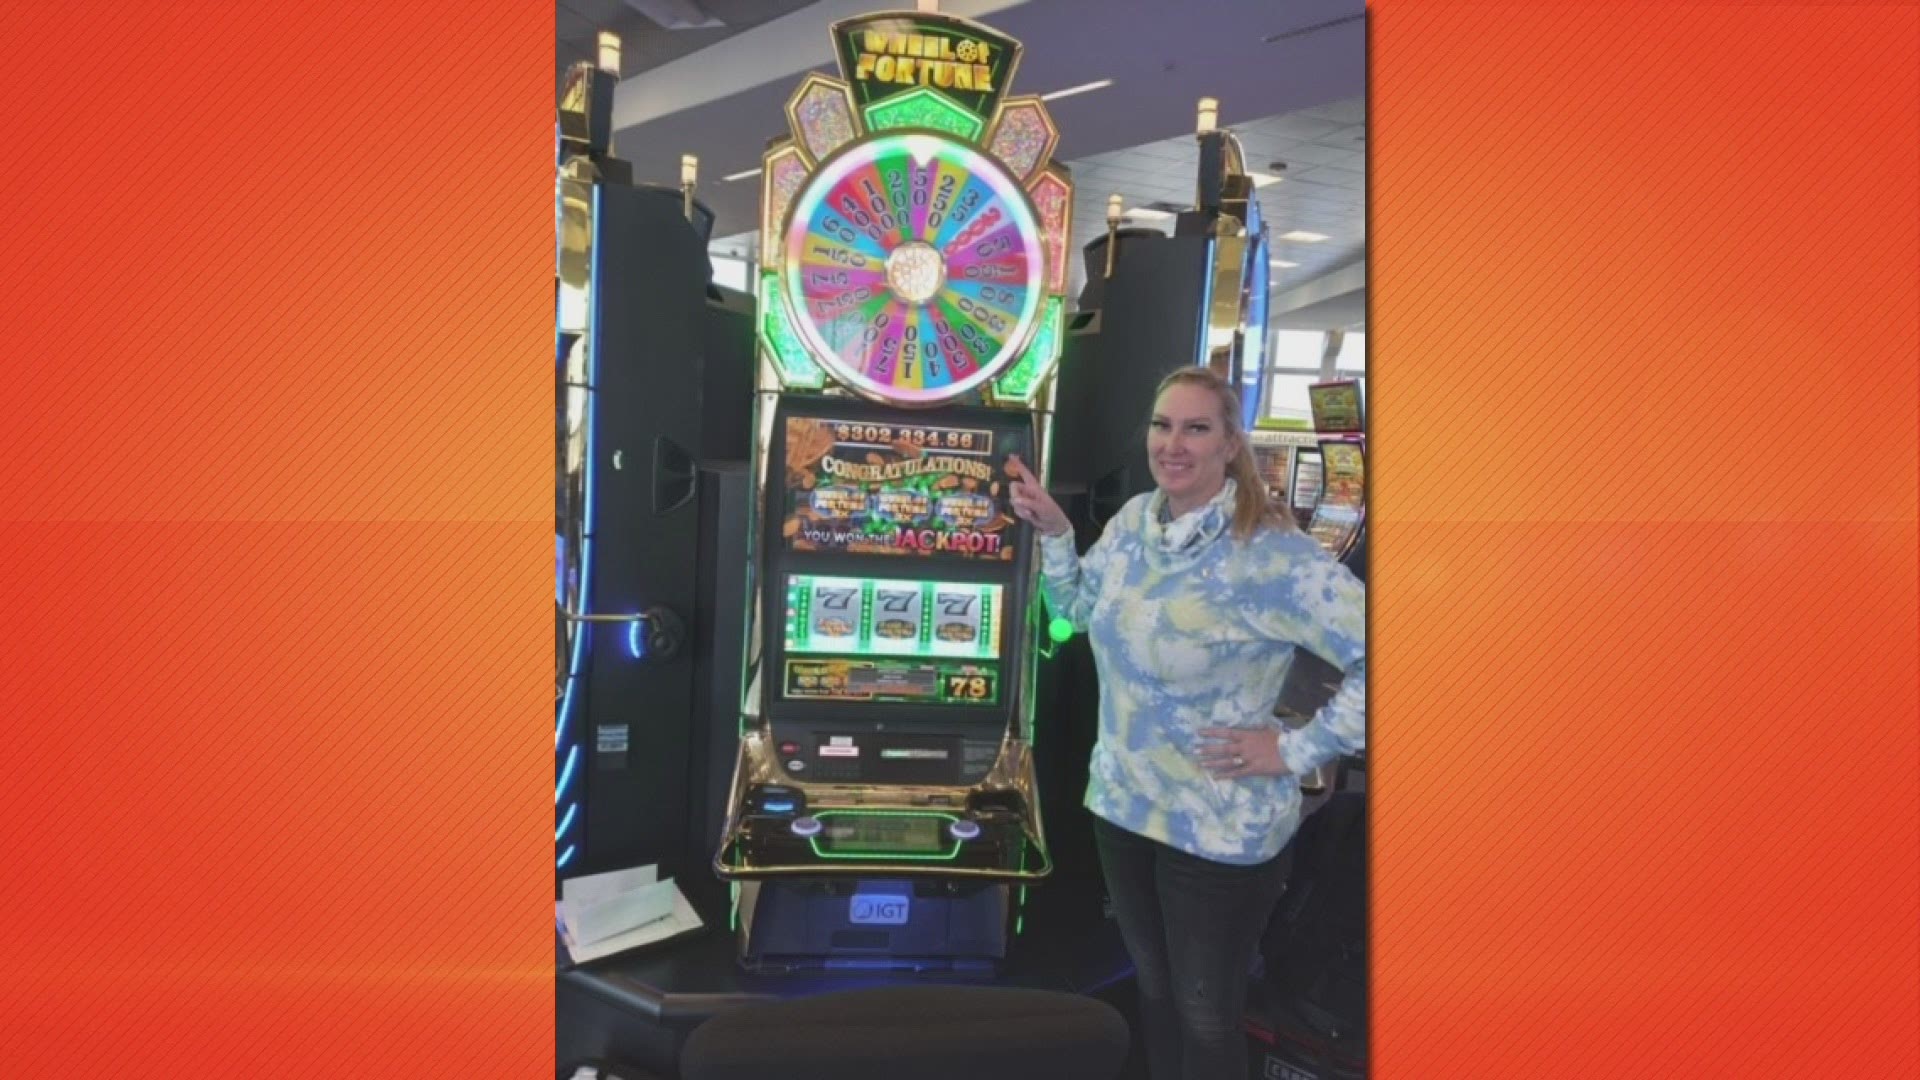 One North Texas woman unexpectedly won big at a Vegas airport.